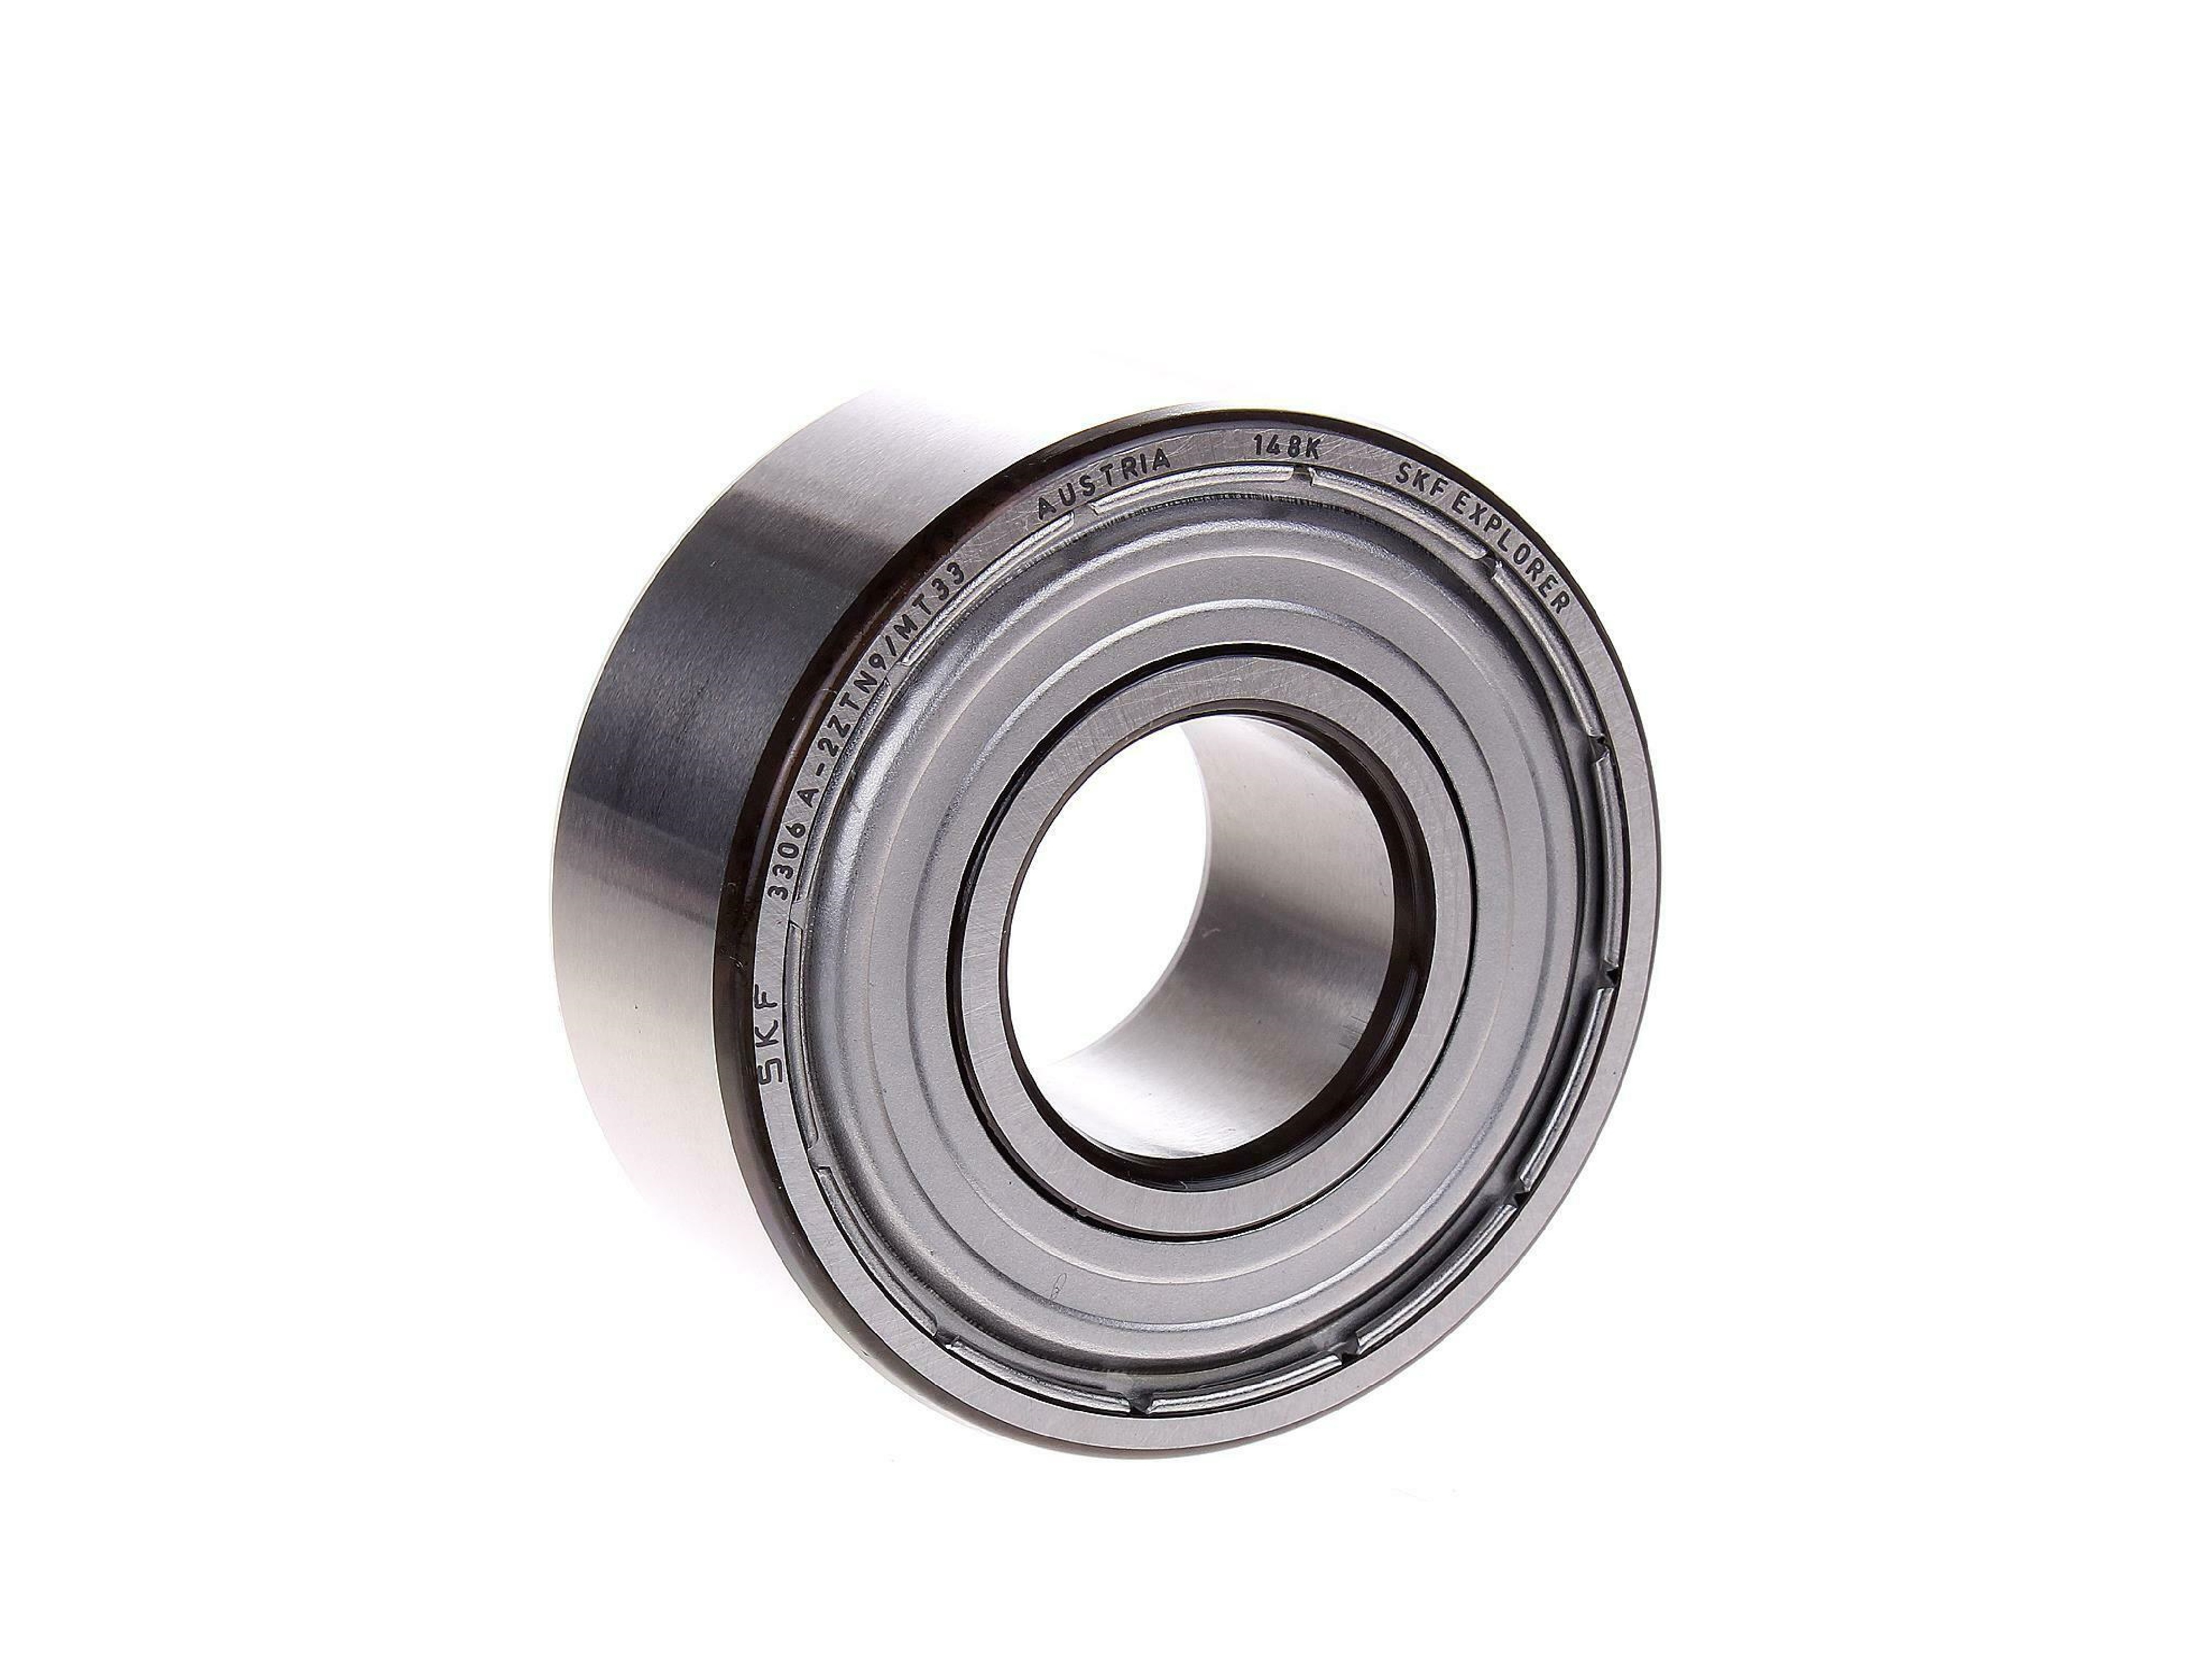 3302A-2ZTN9/MT33 SKF Double Row Angular Contact Ball Bearing - Shielded 15mm x 42mm x 19mm